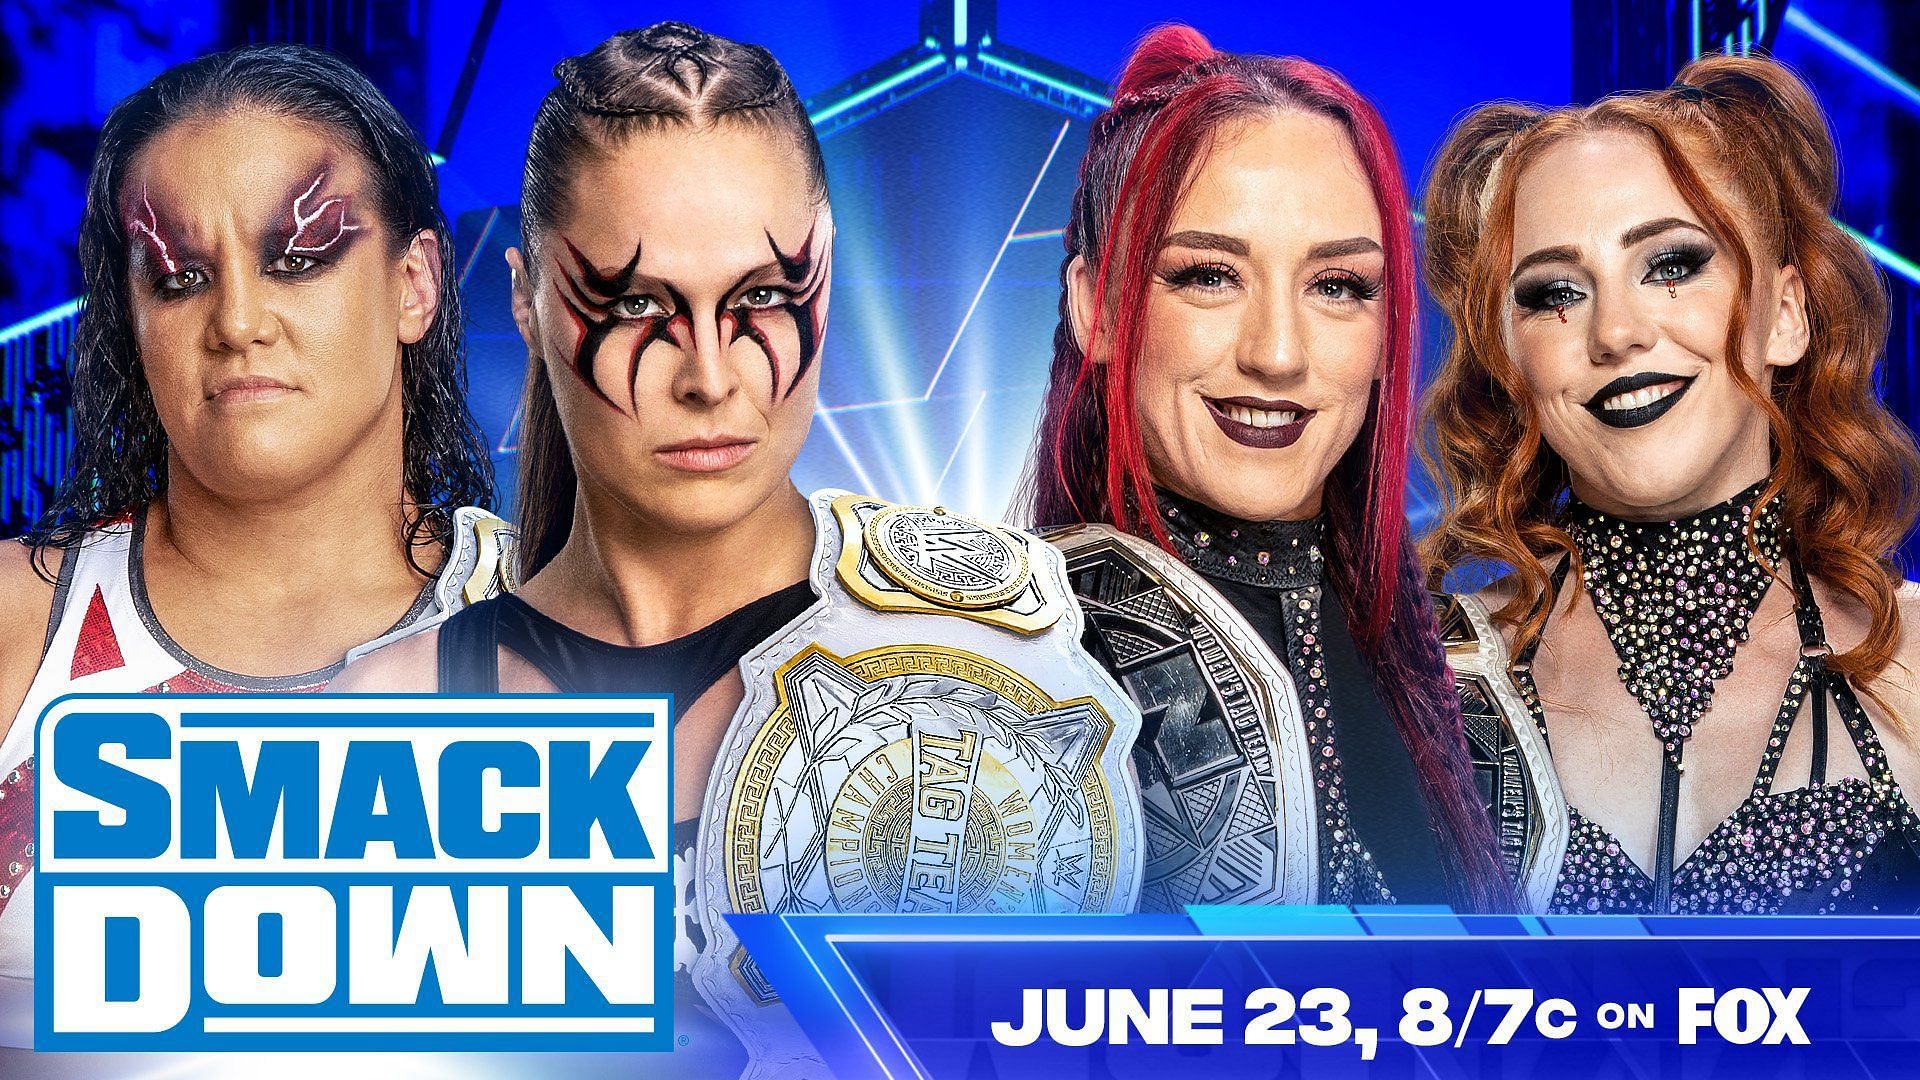 The Unholy Union will clash with Ronda Rousey &amp; Shayna Baszler on WWE SmackDown